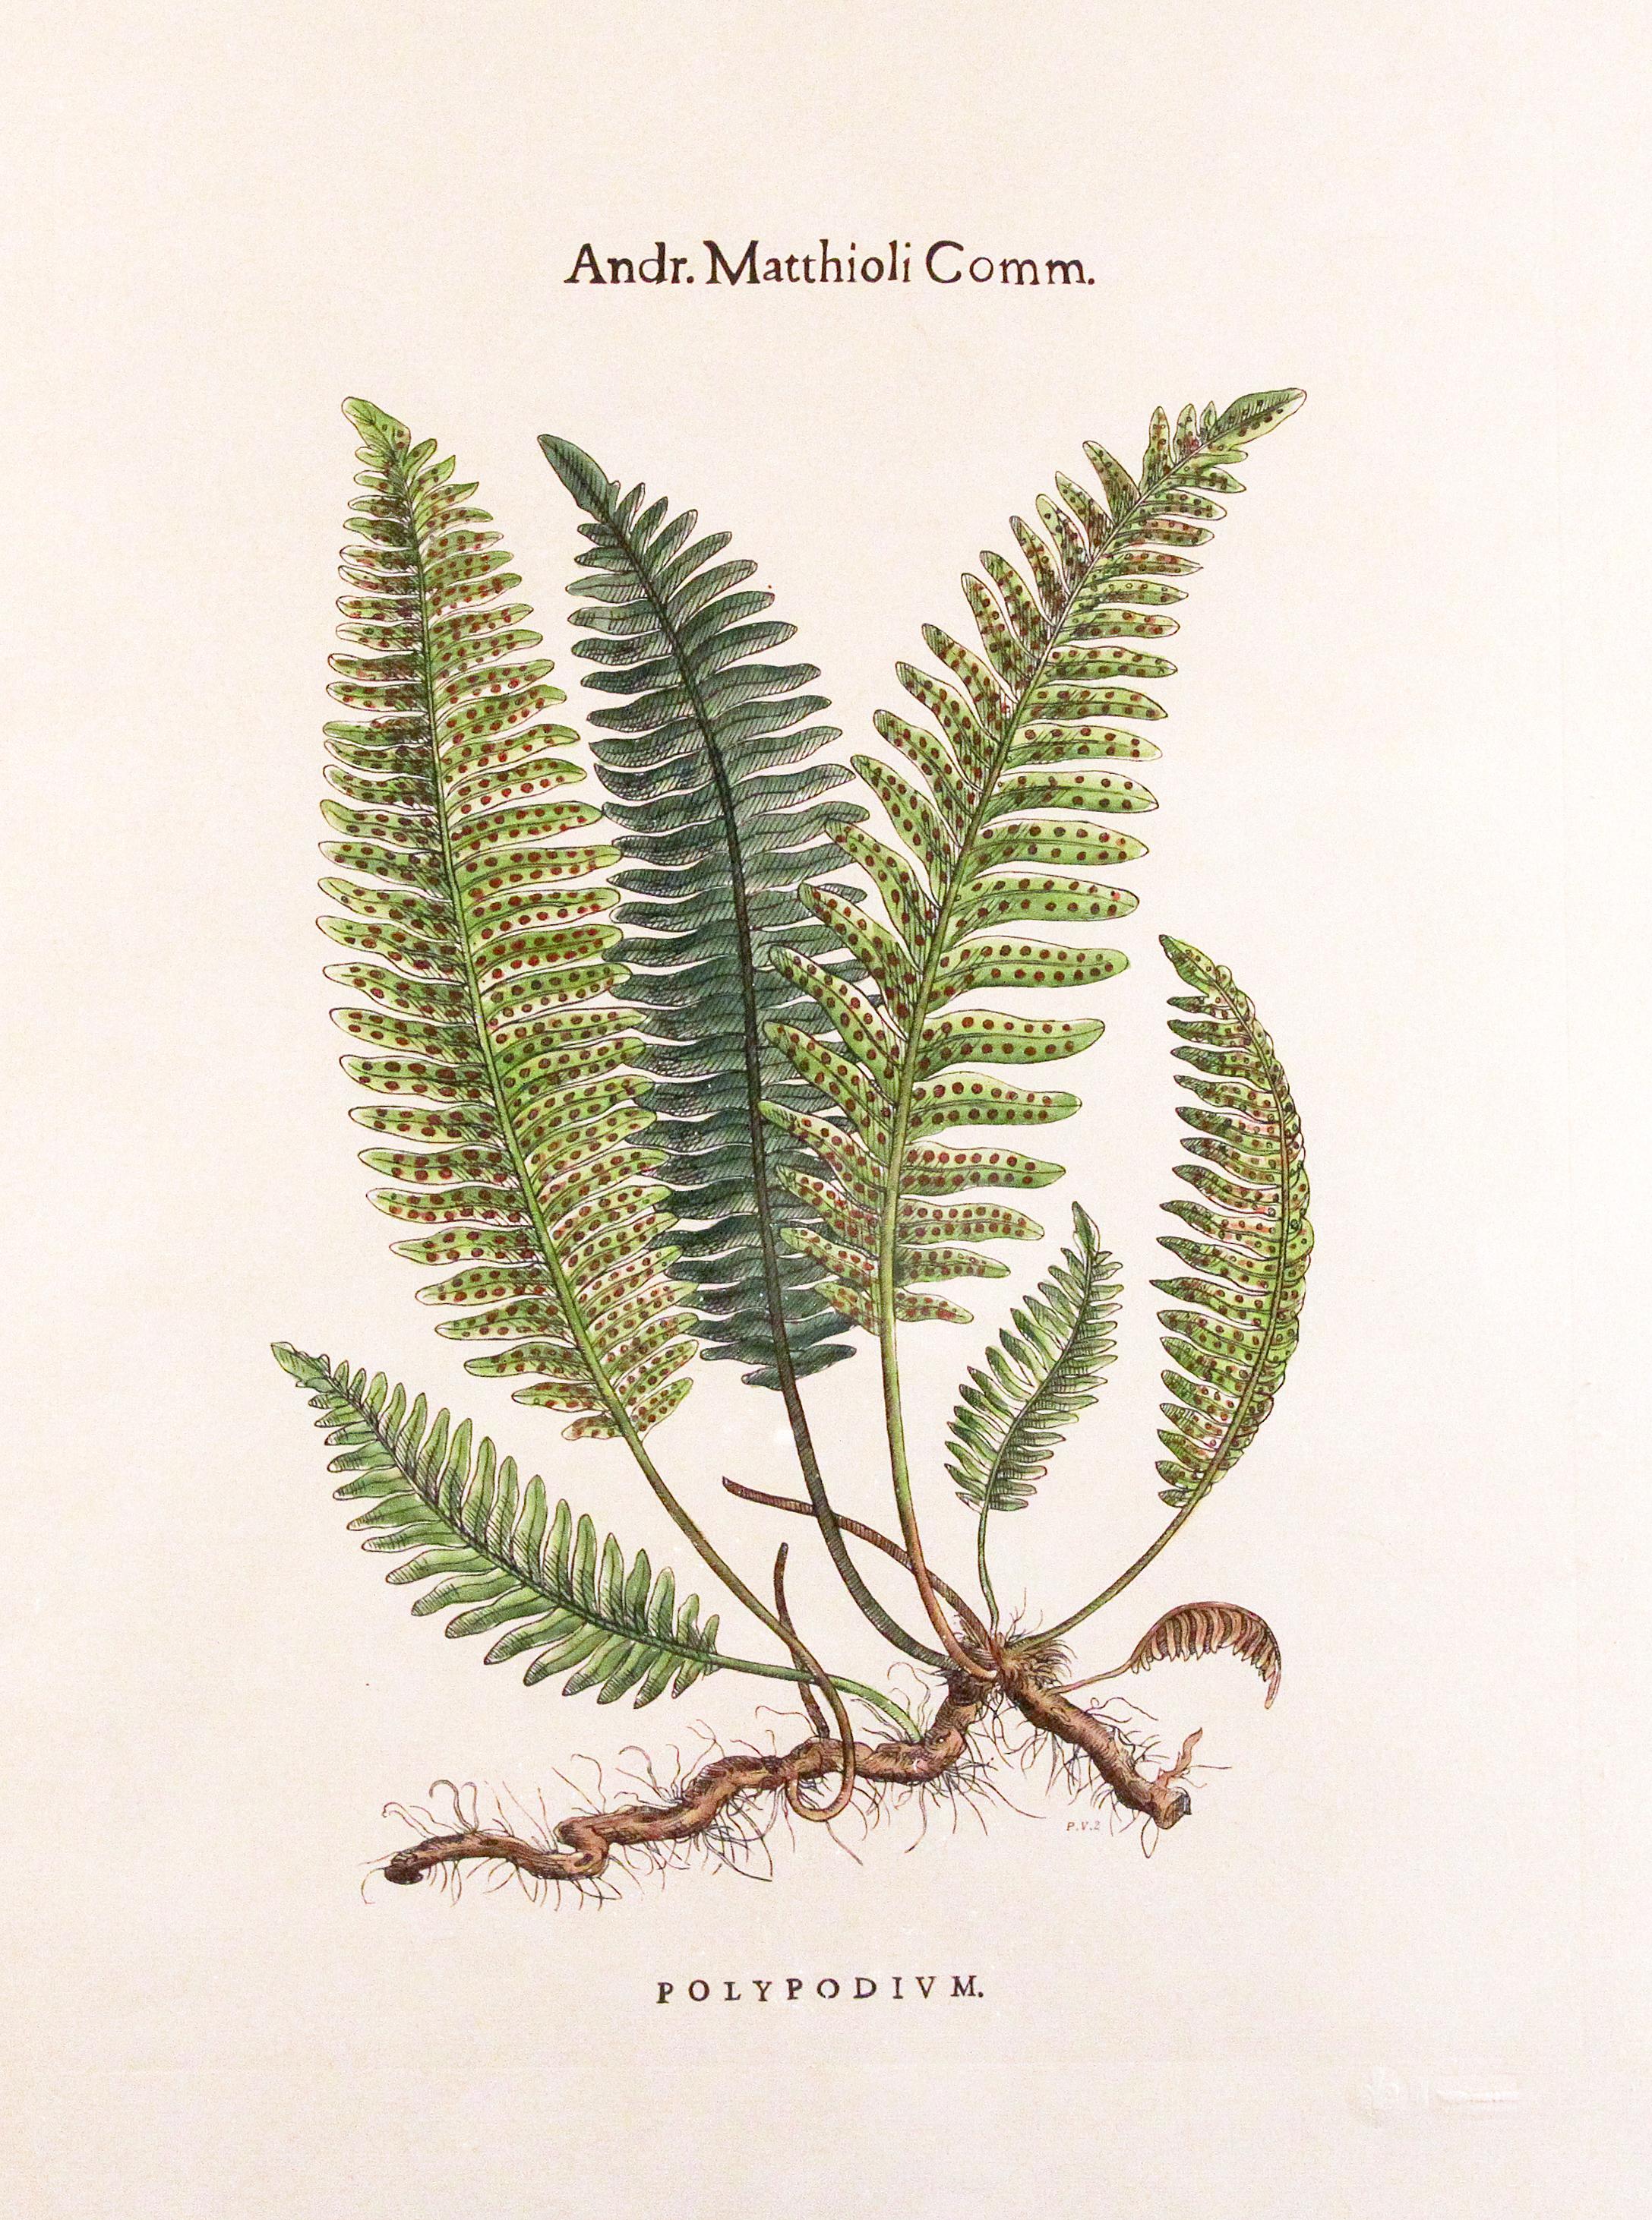 Andr Matthioli Comm. >Polypodium Fern in a white oak frame with laurel green mat, 

Polypodium is a genus of ferns in the family Polypodiaceae, subfamily Polypodioideae, The genus is widely distributed throughout the world, with the highest